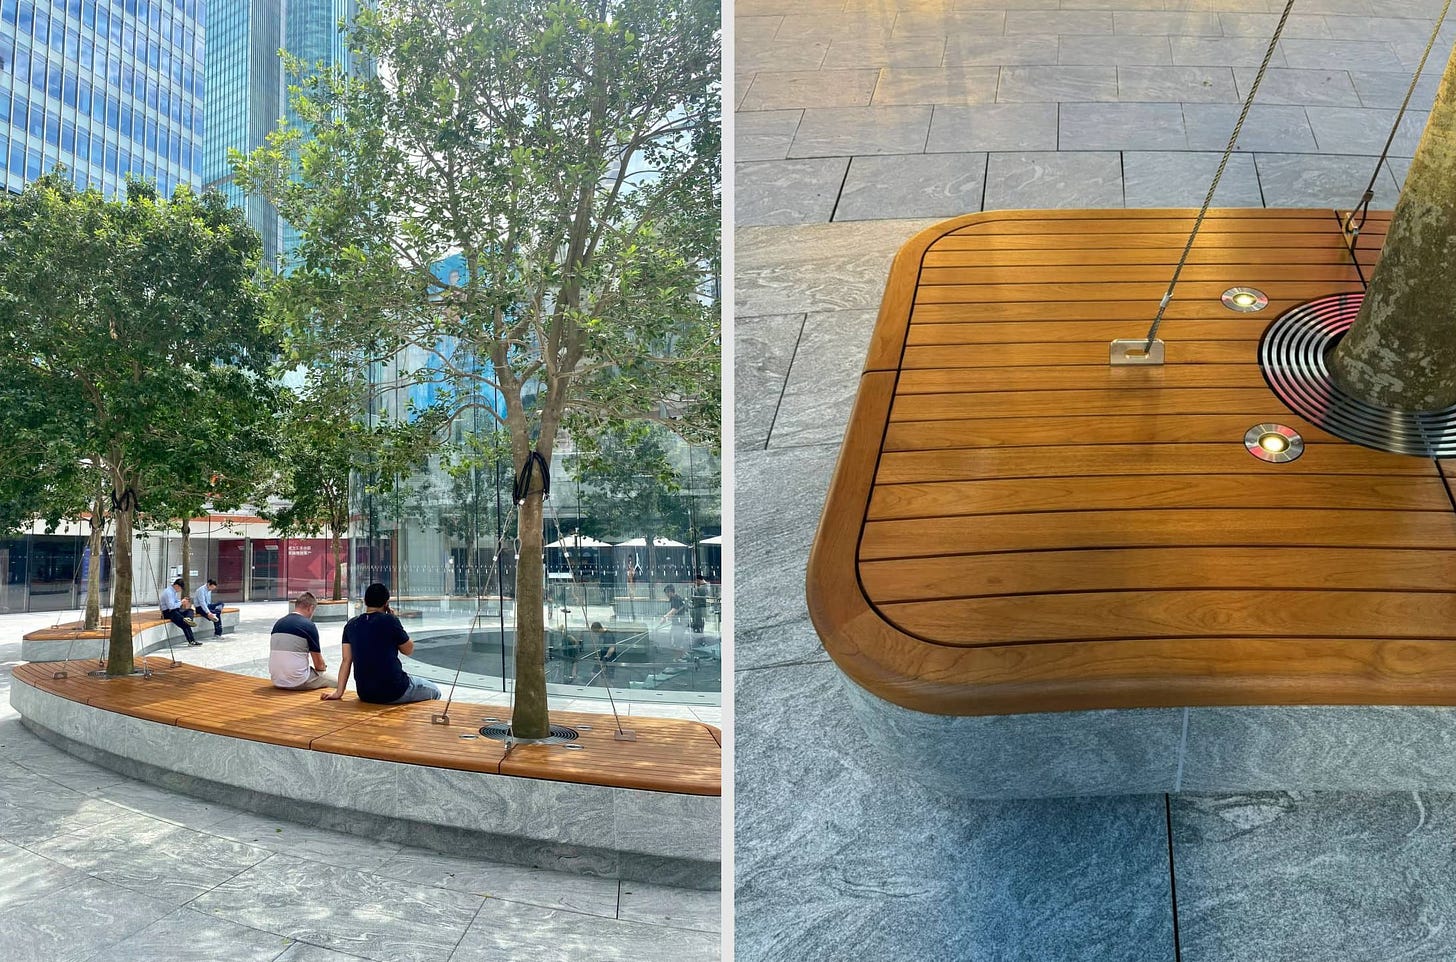 Two views of the plaza seating at Apple Pudong. The first photo shows visitors sitting below trees on the plaza, the second photo shows a closeup of the hardware anchored to the seats that supports each tree.